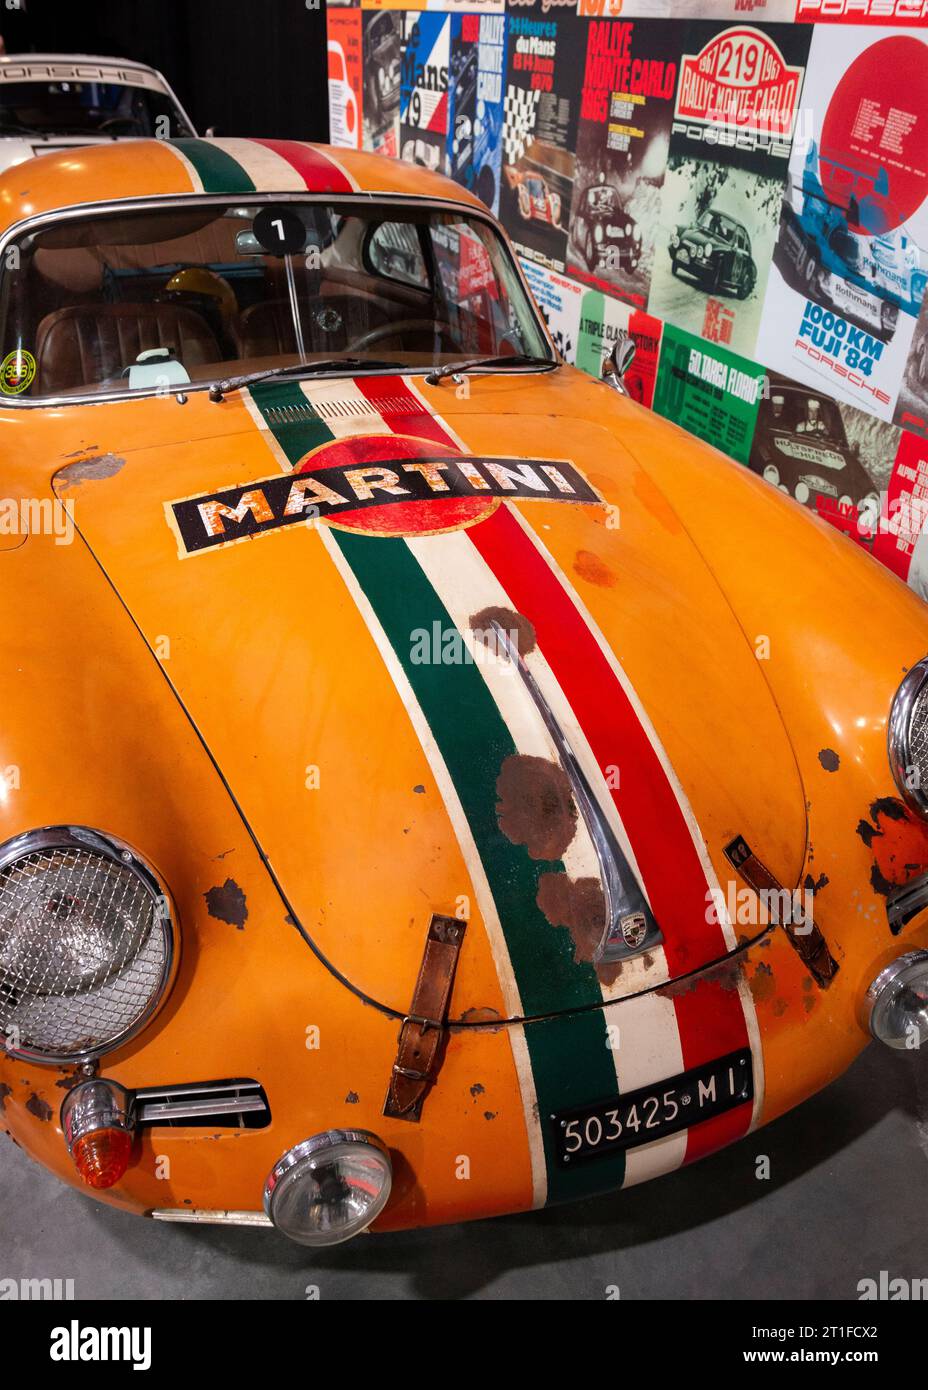 Front view of orange Porsche 356 C 1600 racing car from 1964 with Italian number plate, Martini branded and Italian flag livery Stock Photo